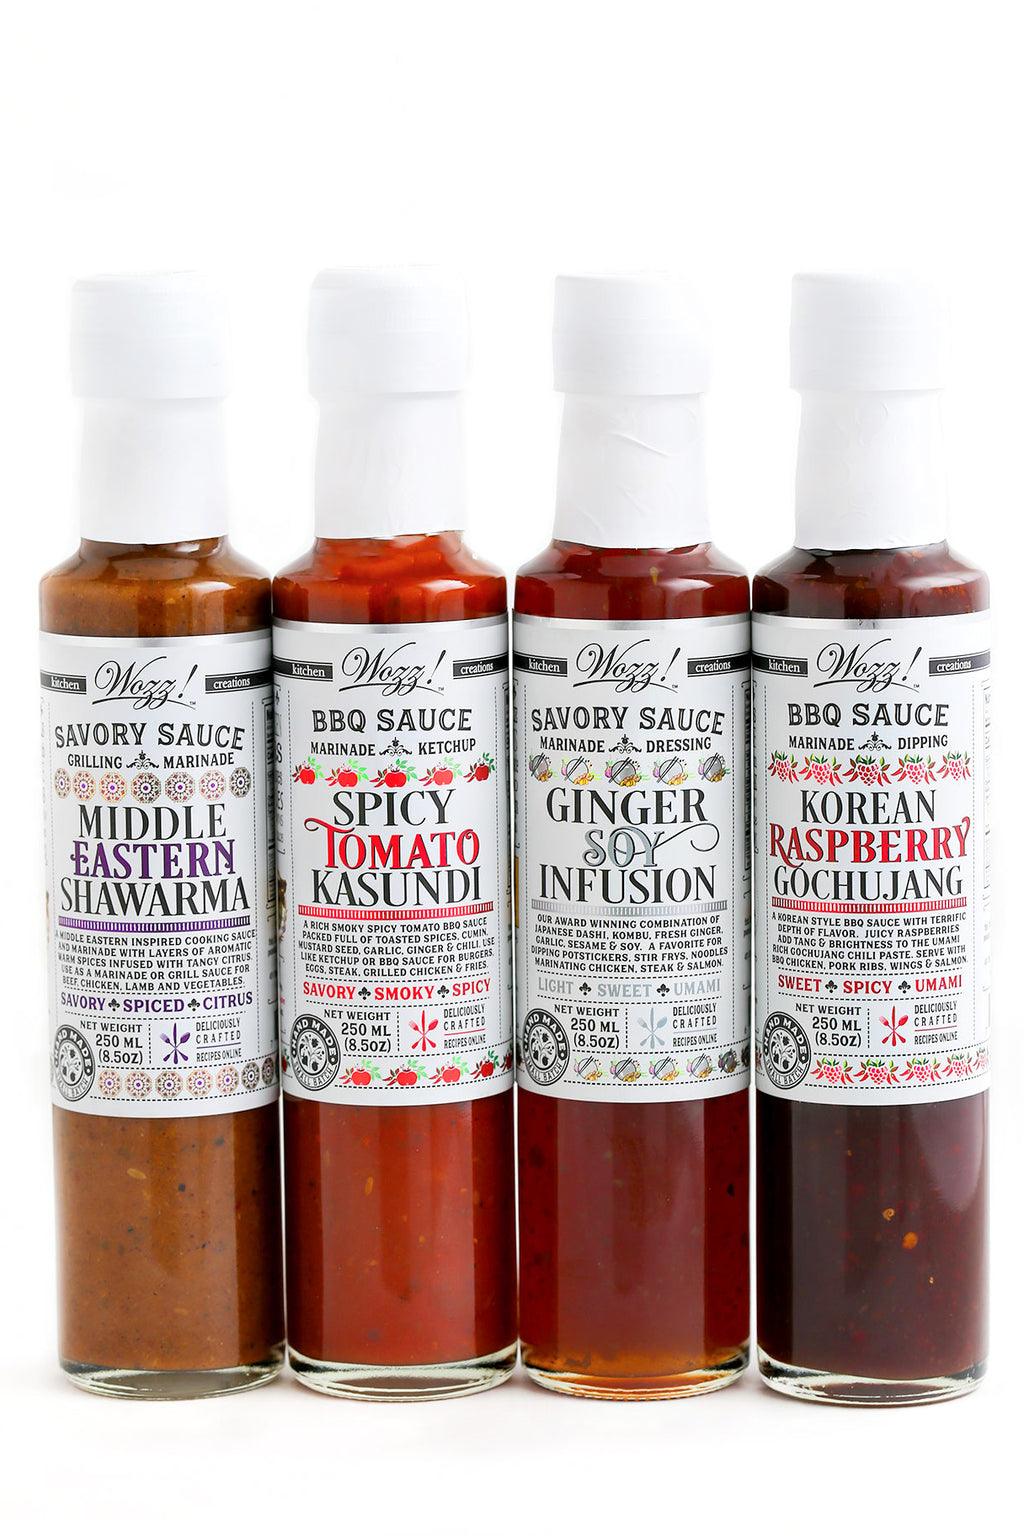 Grilling Marinades and Sauces Set